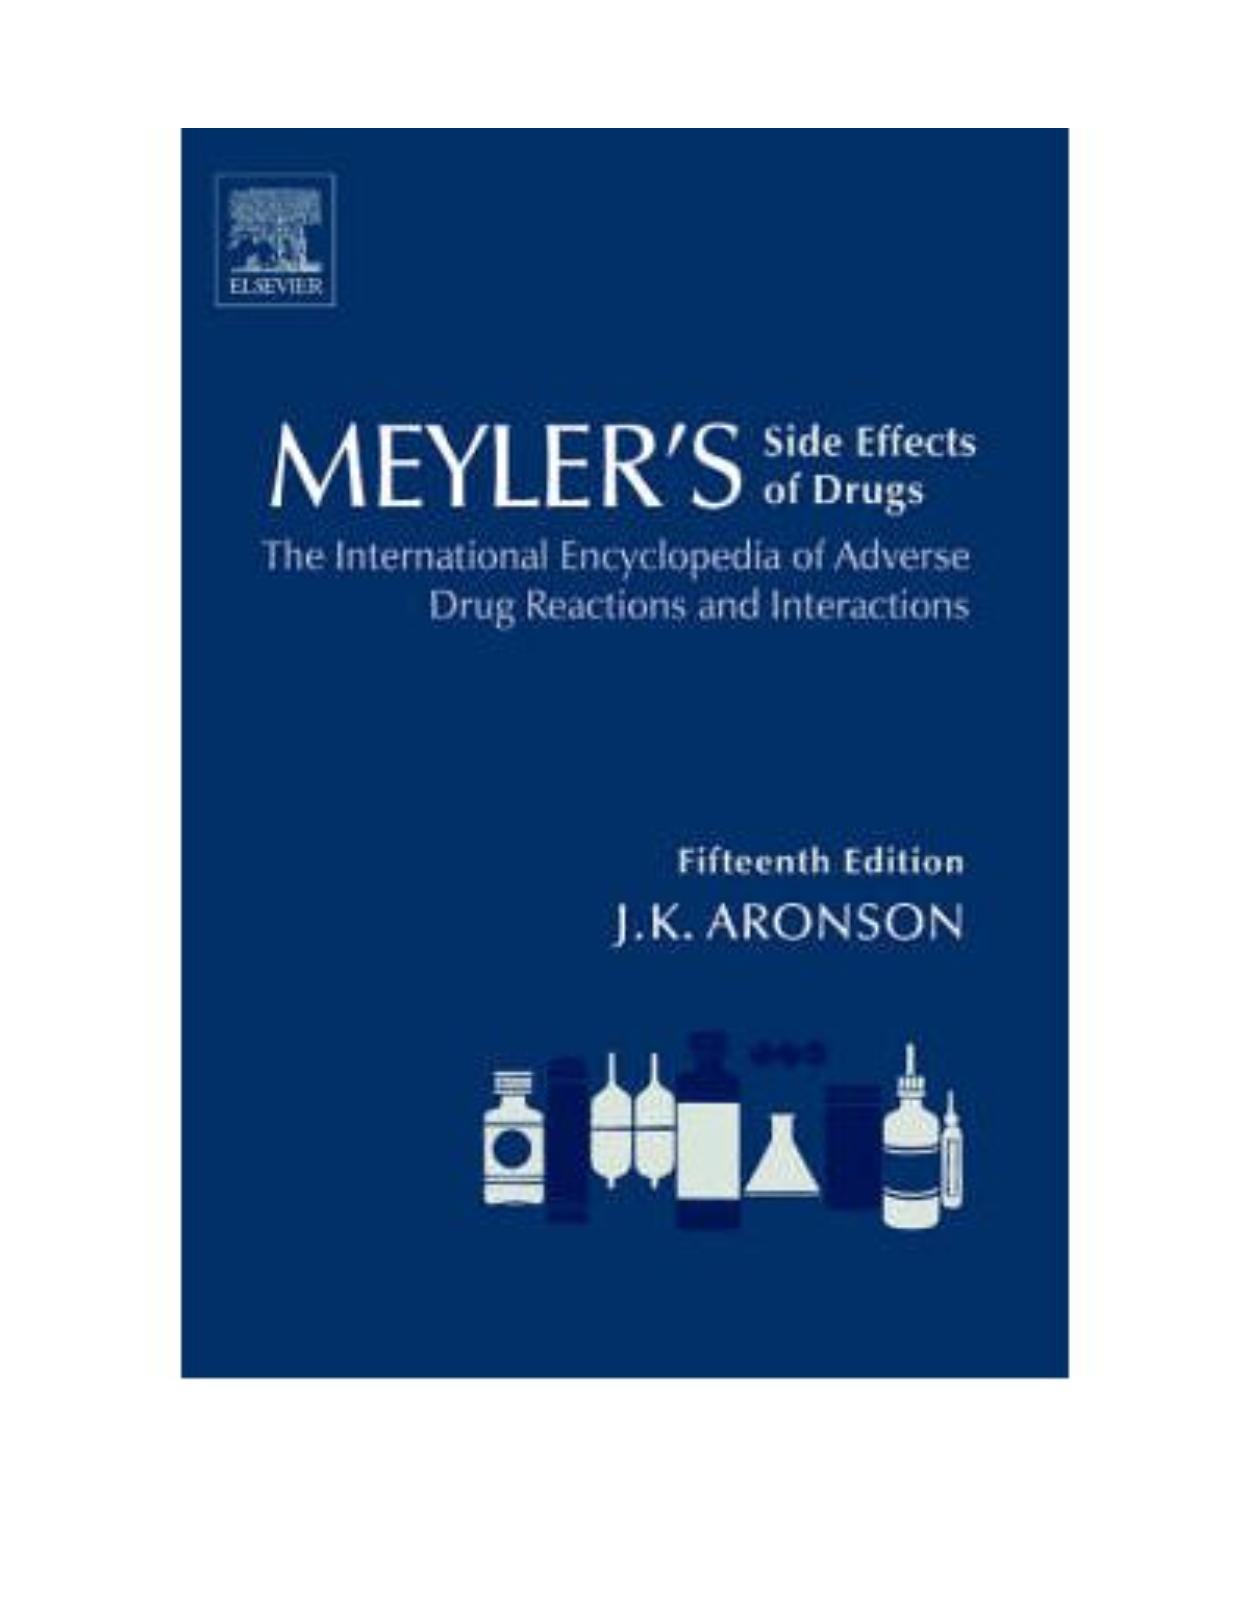 Meyler's Side Effects of Drugs, 15th edition